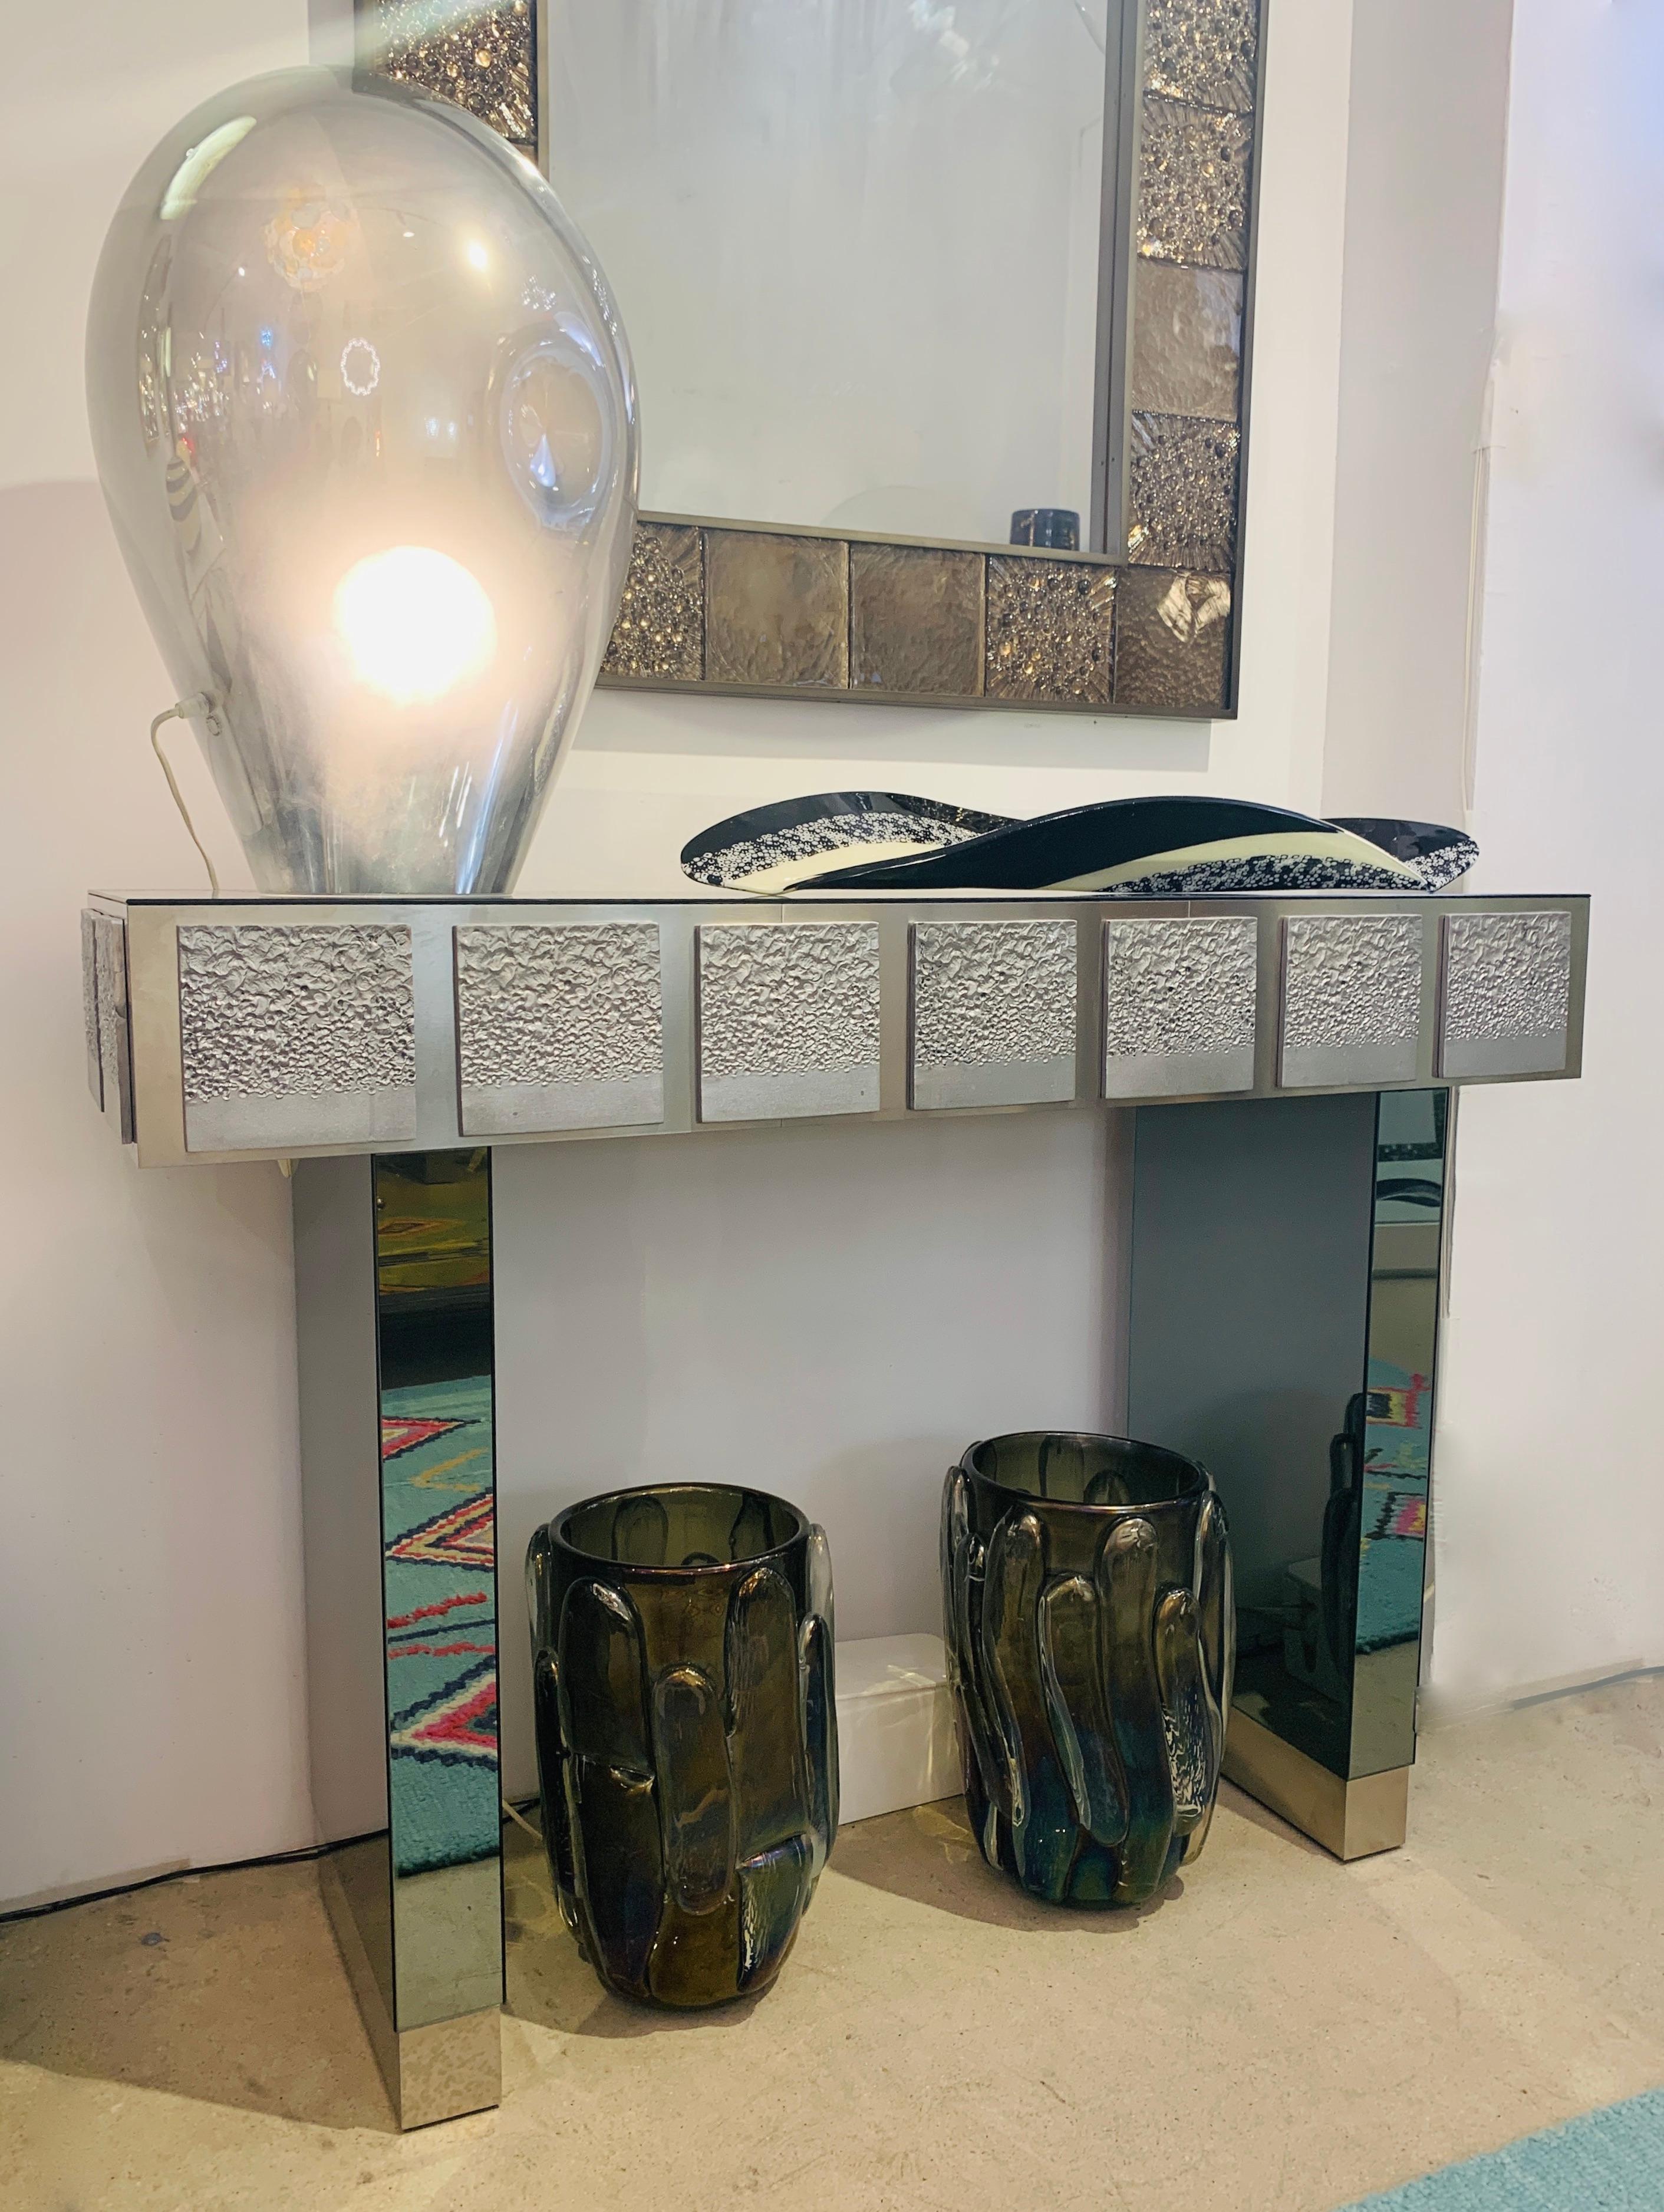 Organic Modern Bespoke Italian Contemporary One-of-a-Kind Polished Steel Smoked Mirror Console For Sale